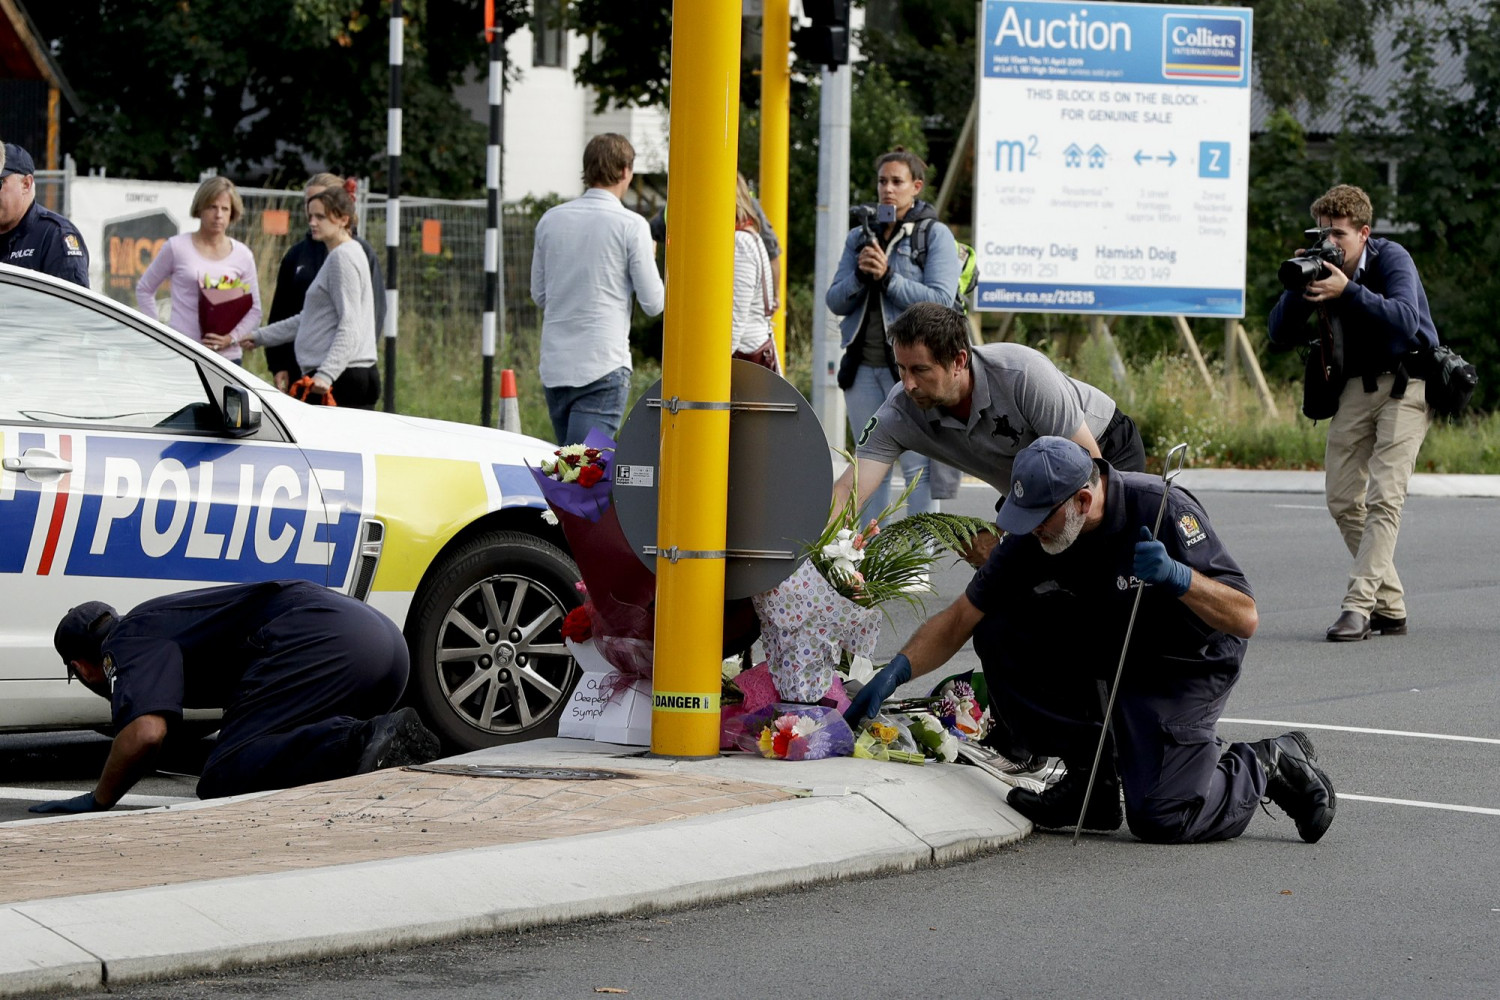 New Zealand Shooting Suspect Briefly Appears in Court